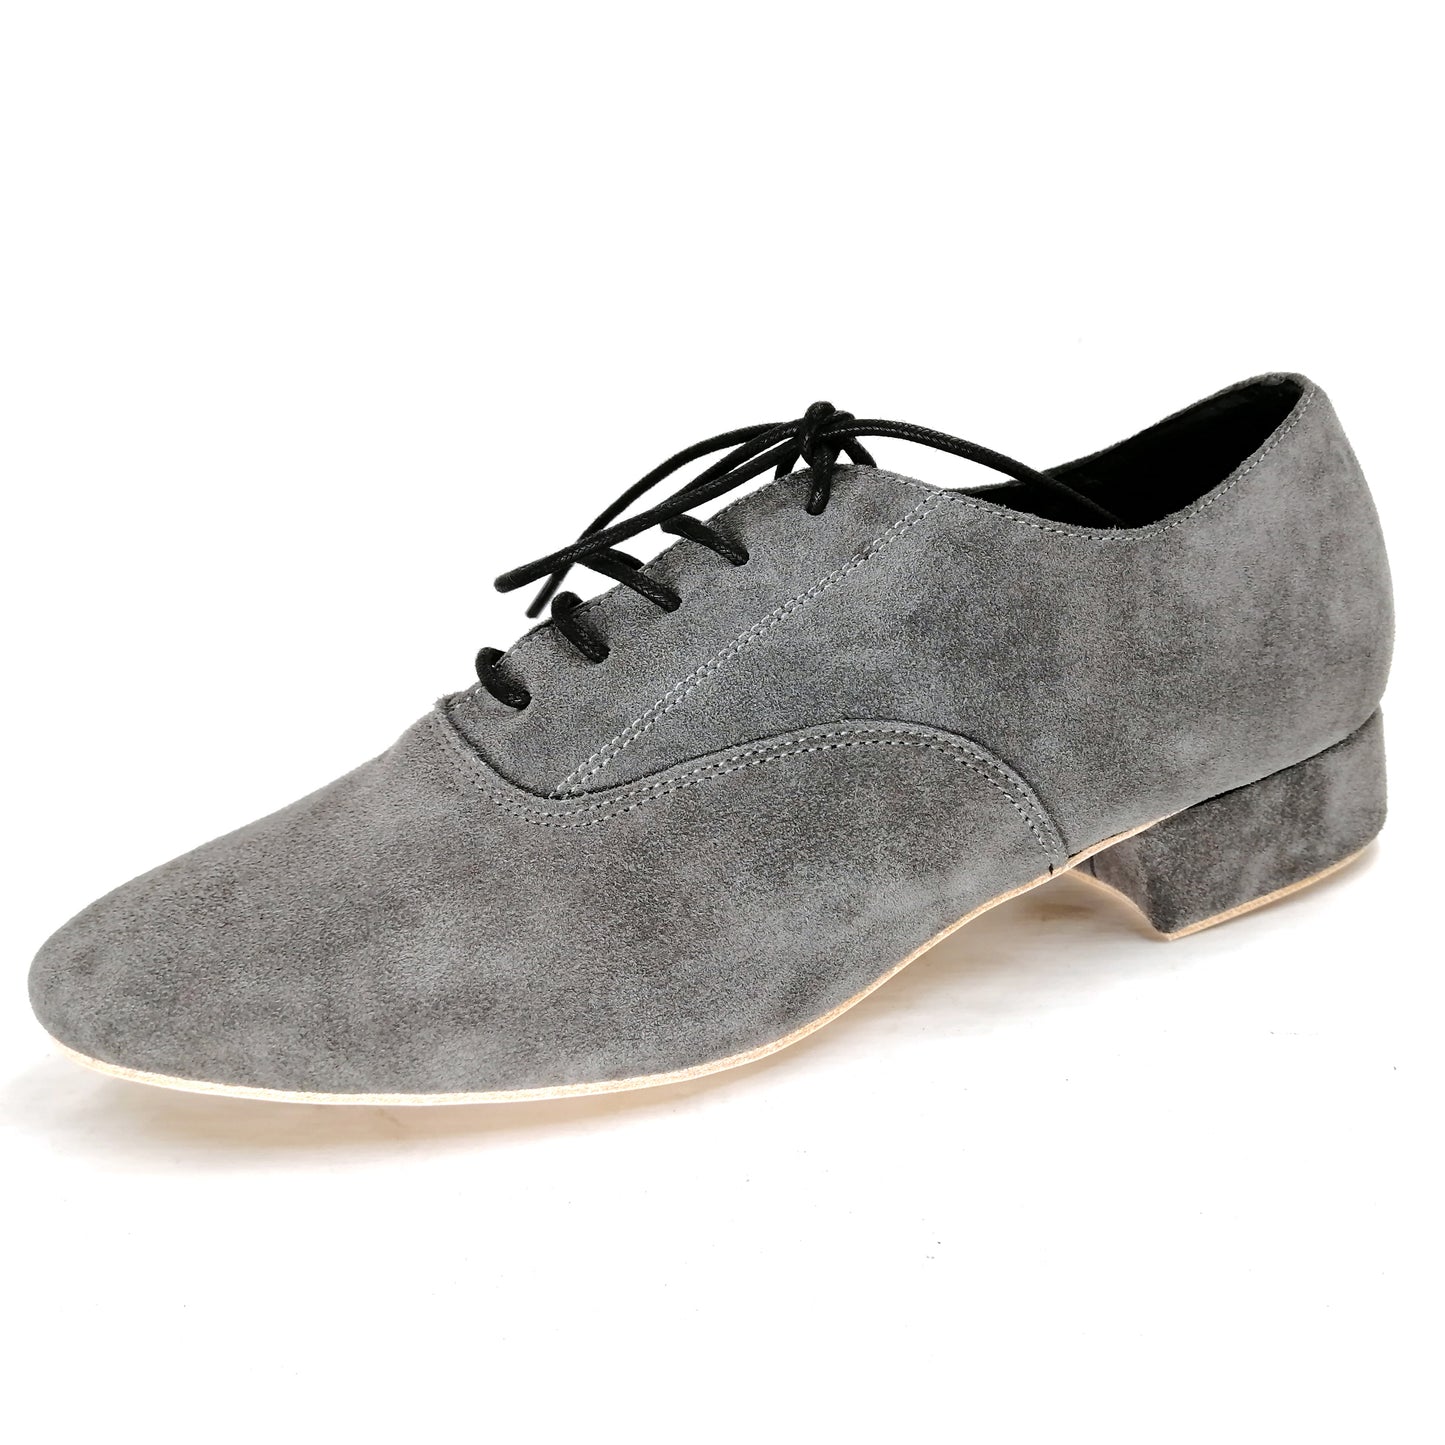 Pro Dancer Argentine Tango Shoes Mens Leather Sole 1 inch Heel Lace-up Gray (PD-1002C)